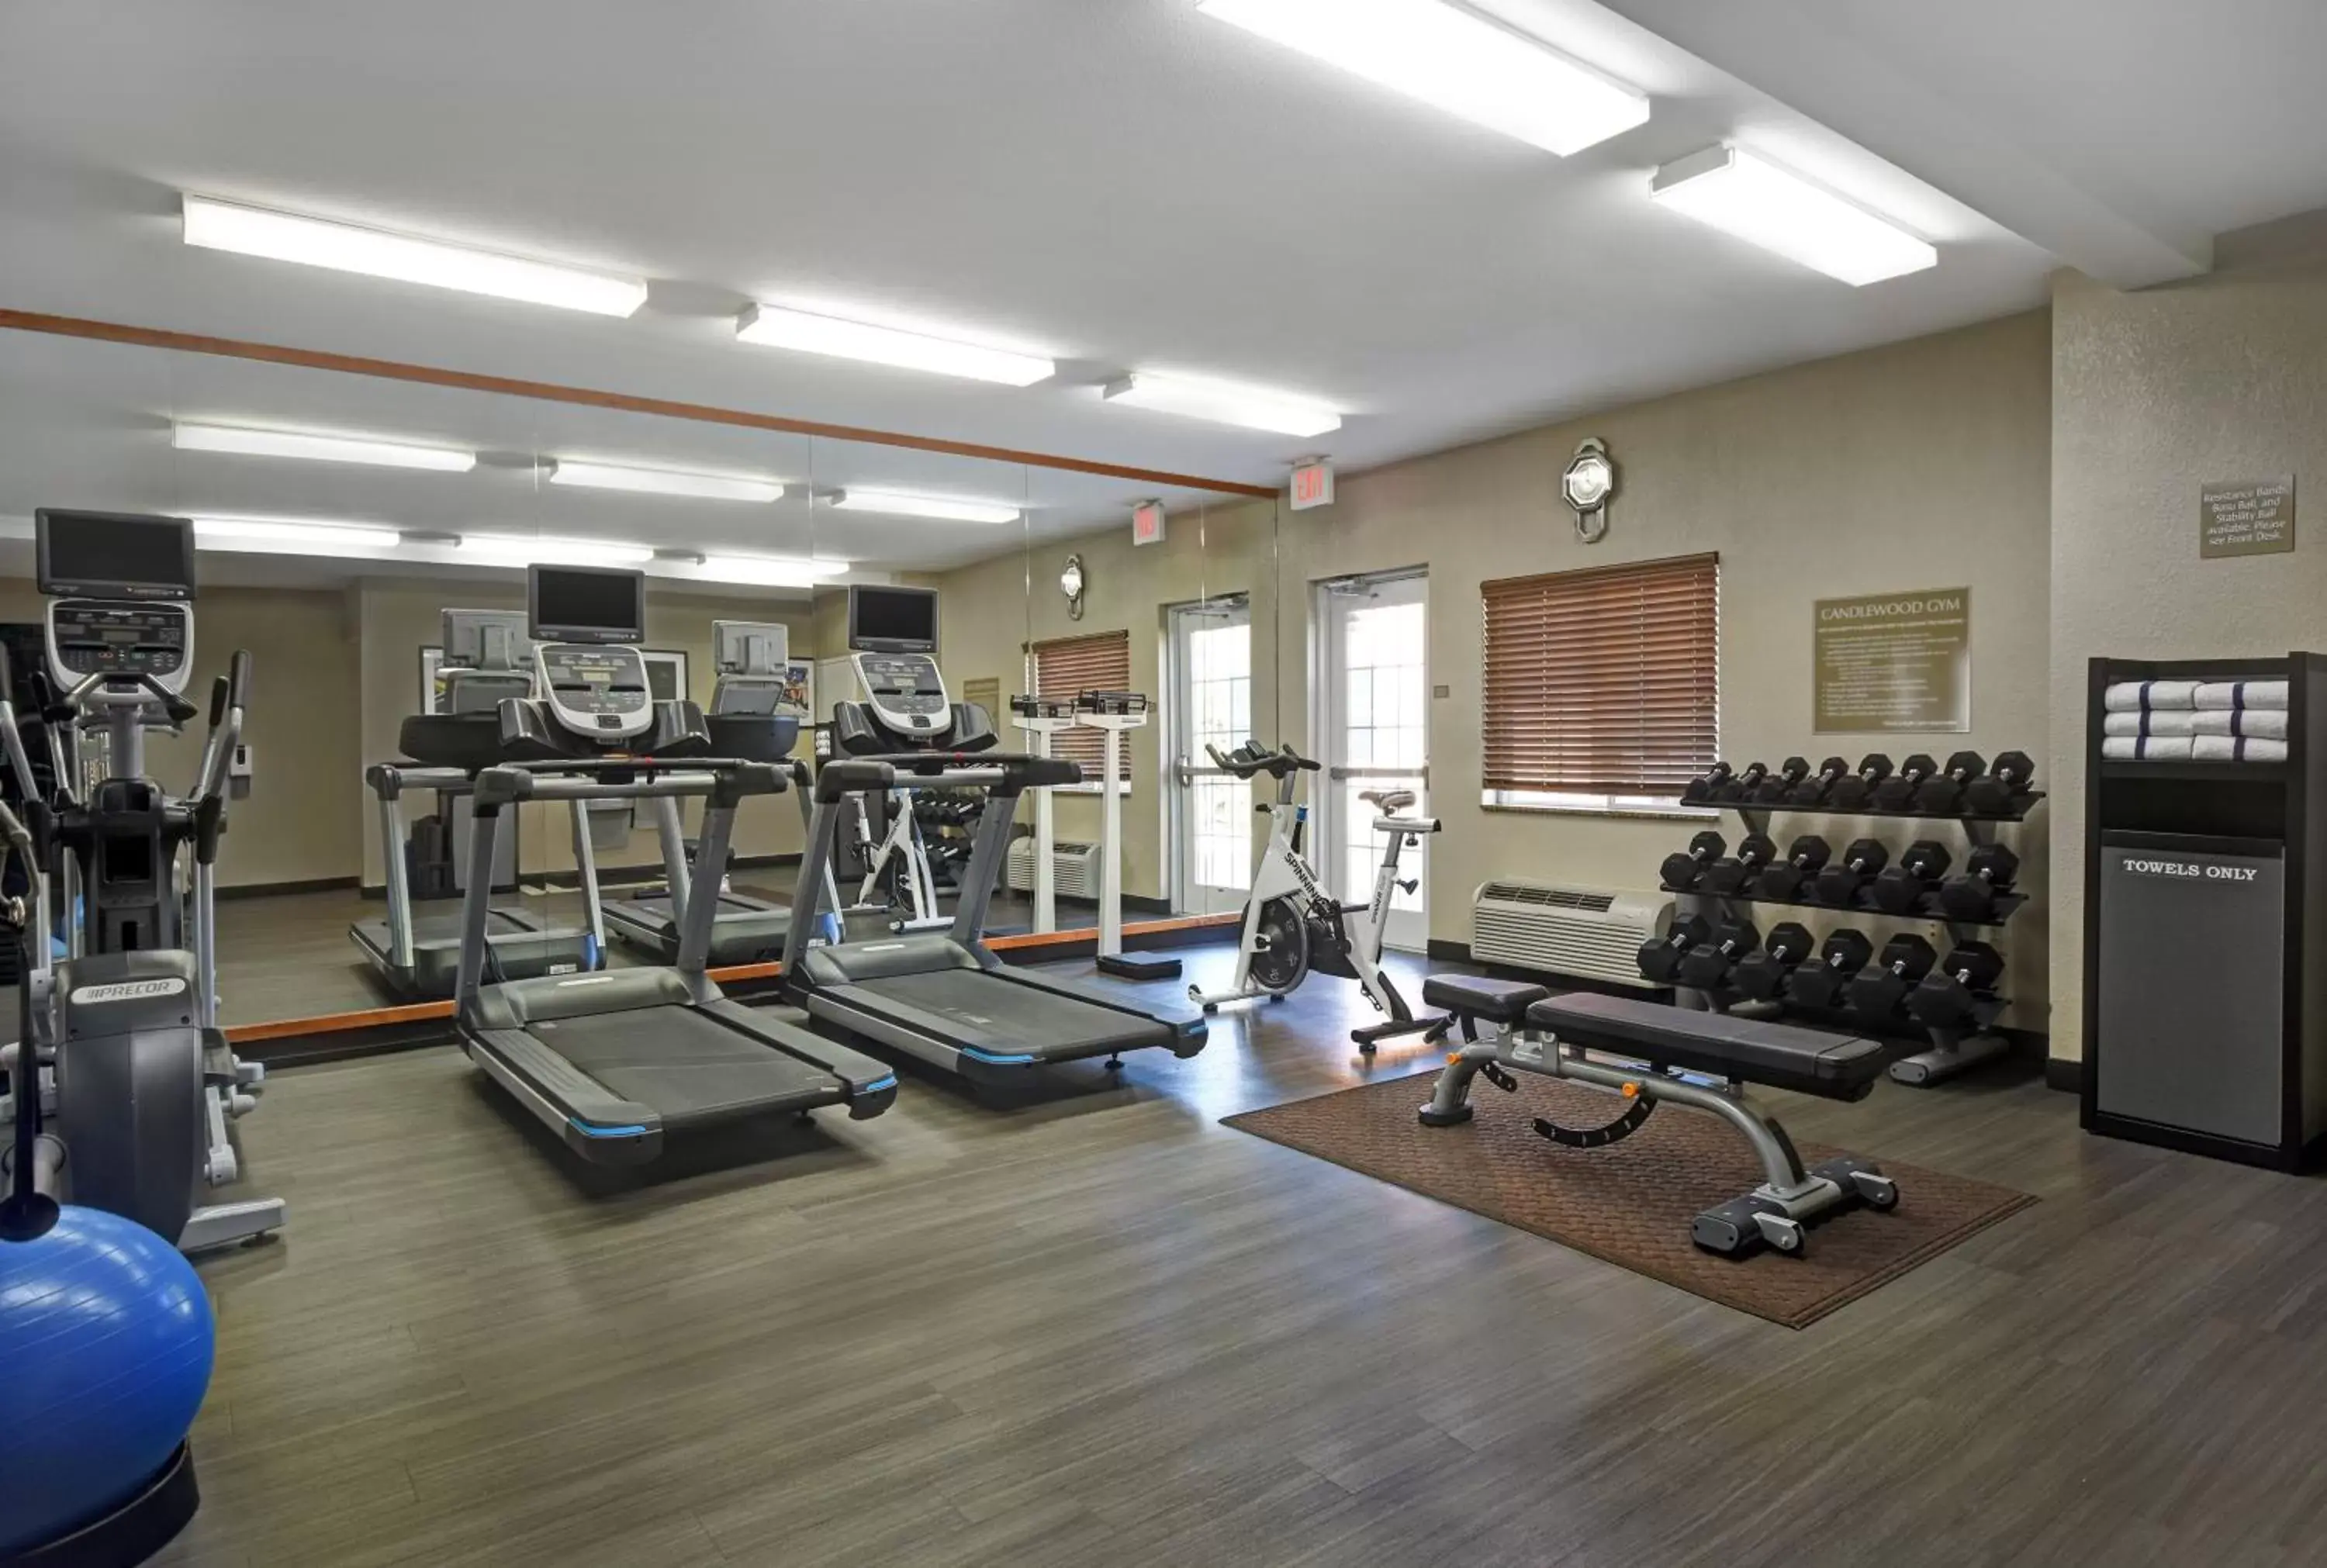 Fitness centre/facilities, Fitness Center/Facilities in Candlewood Suites Sumter, an IHG Hotel